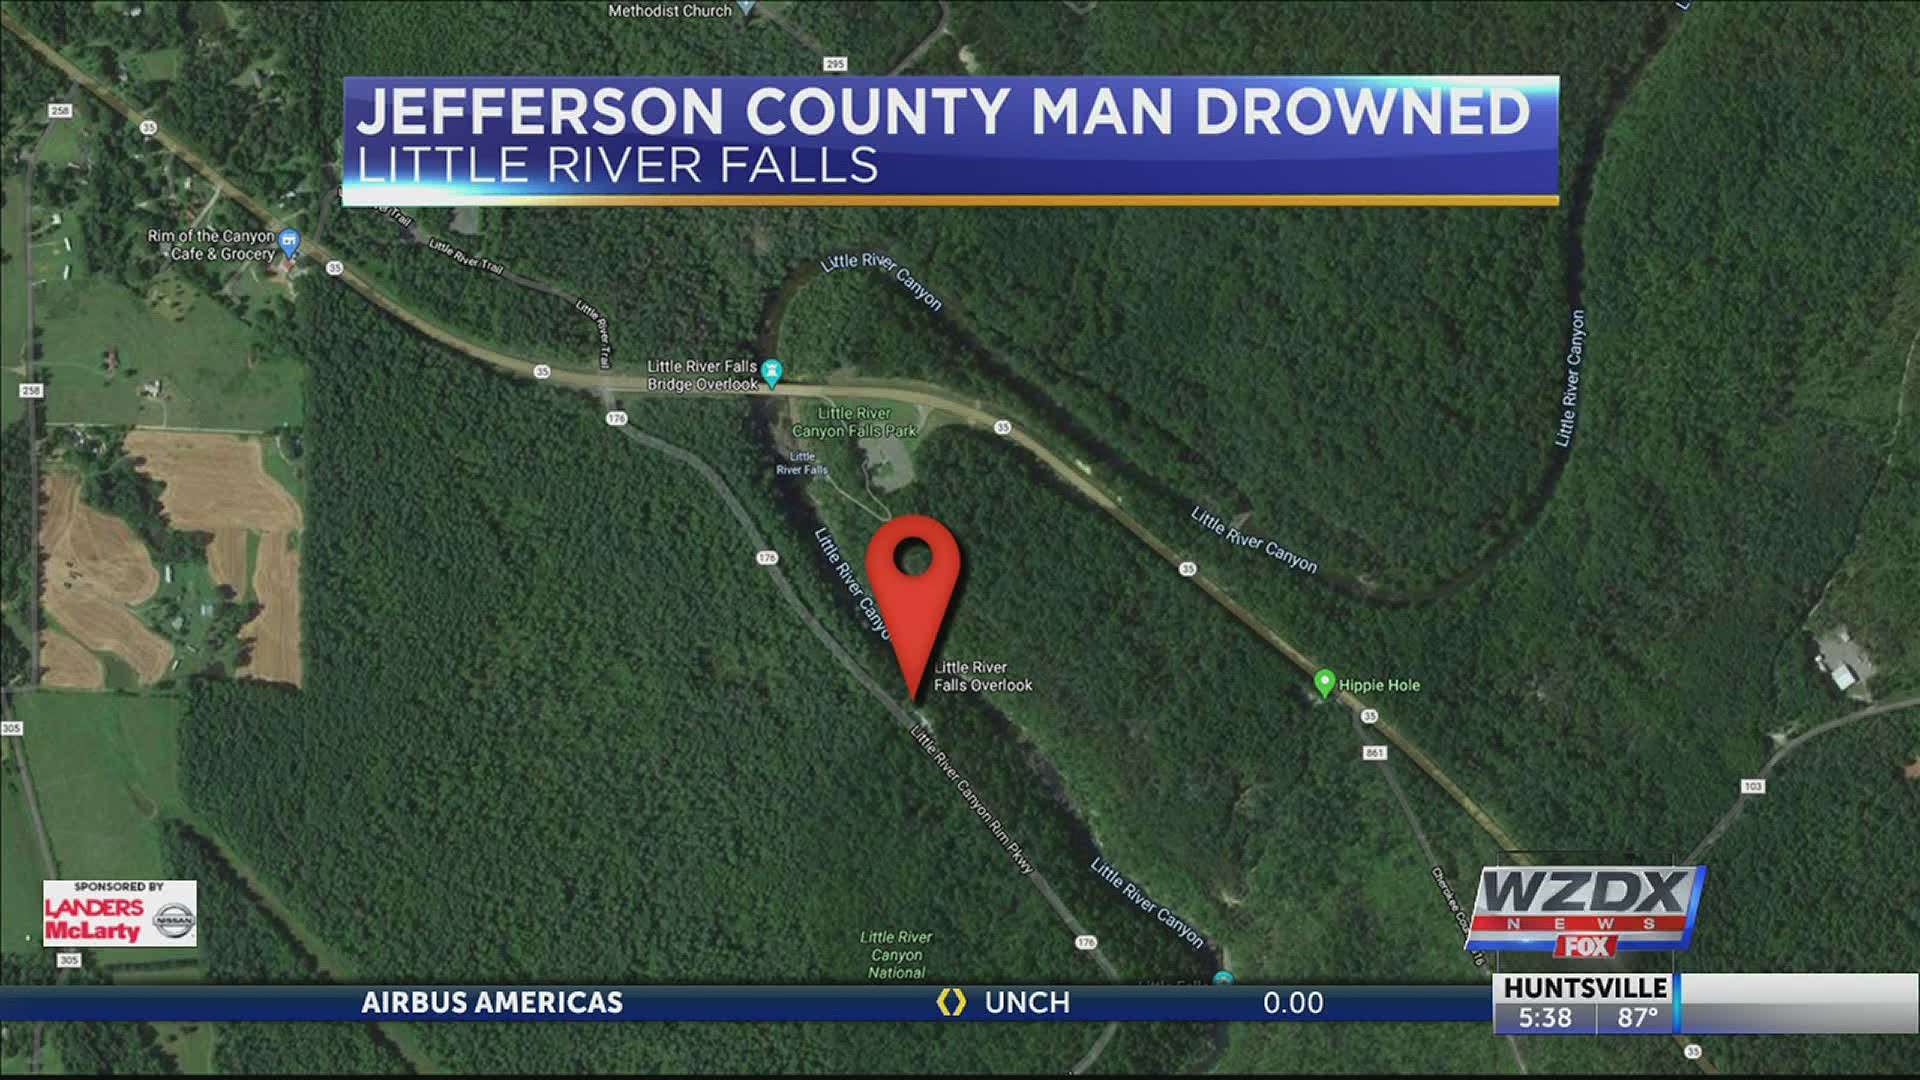 A Jefferson County man sadly drowned yesterday at Little River Falls.